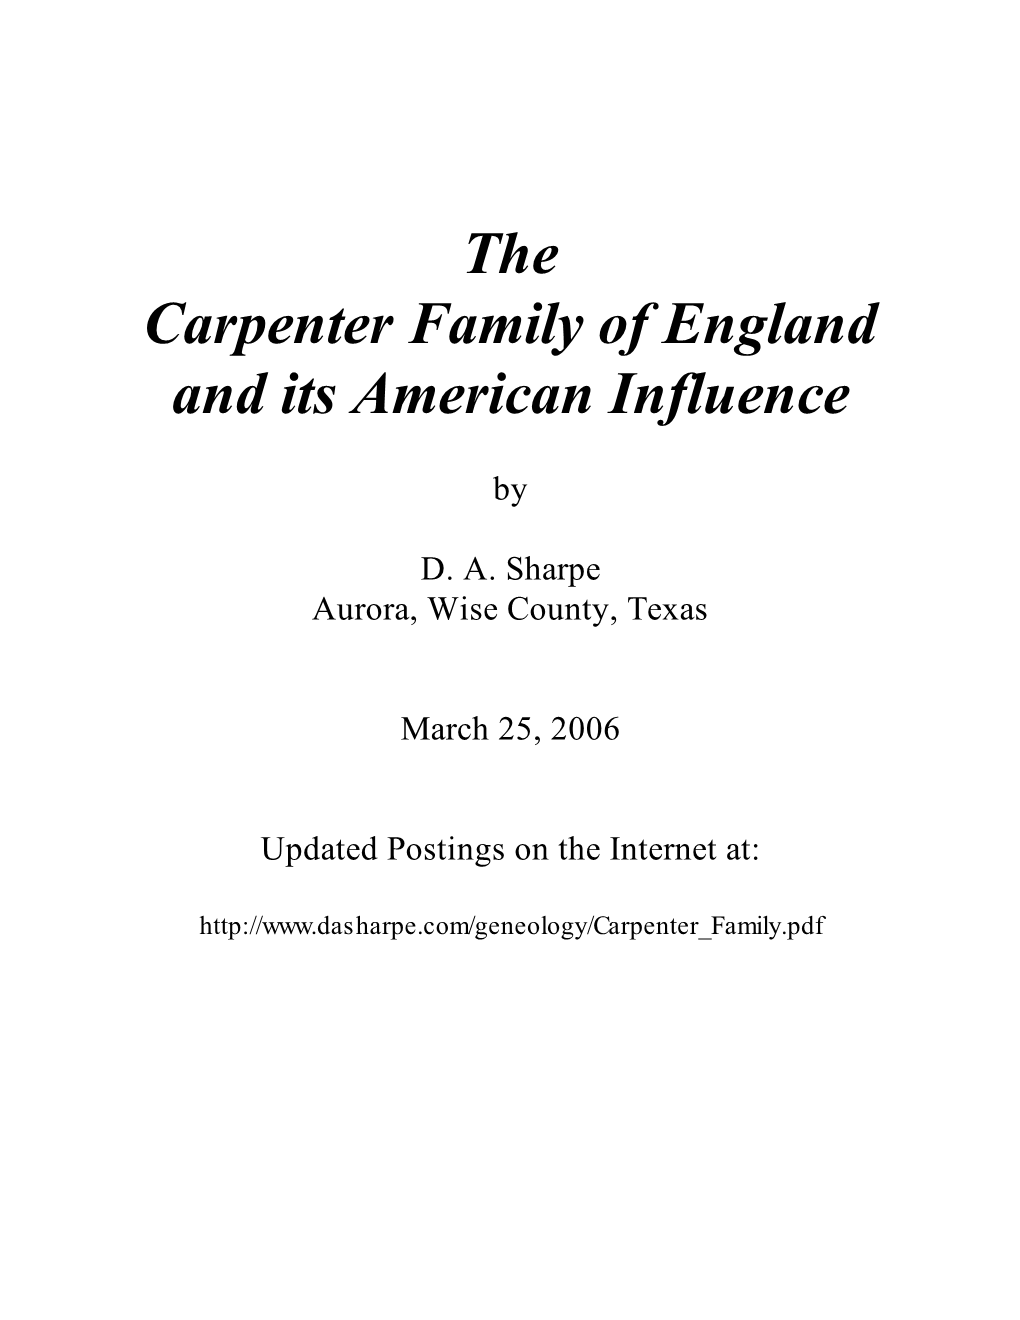 The Carpenter Family of England and Its American Influence